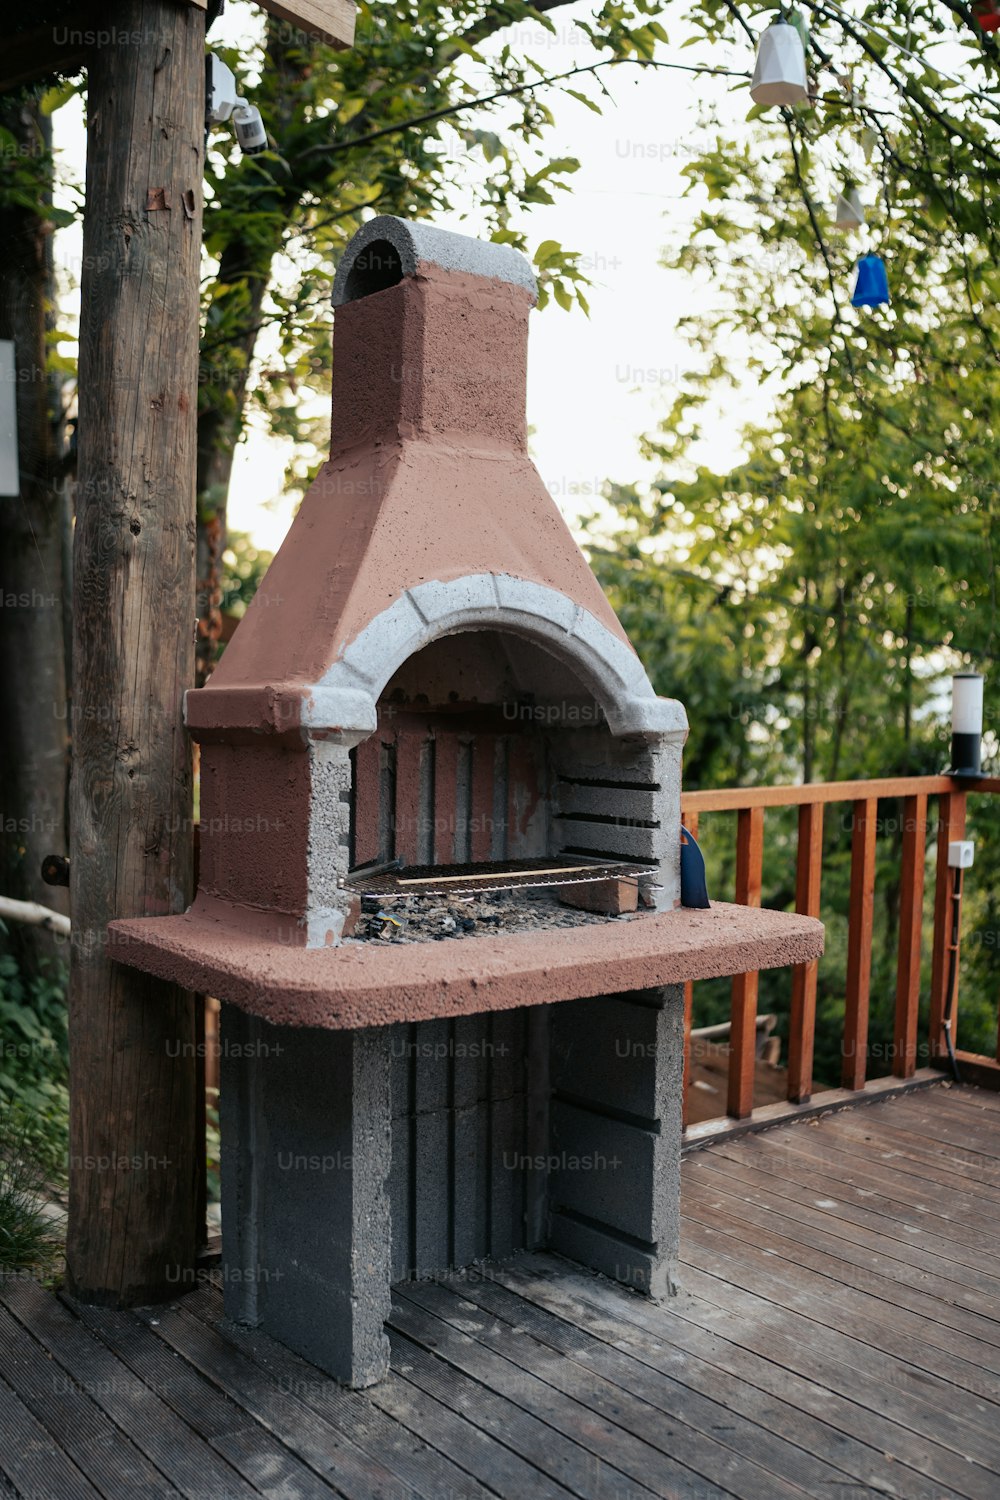 a brick oven sitting on top of a wooden deck